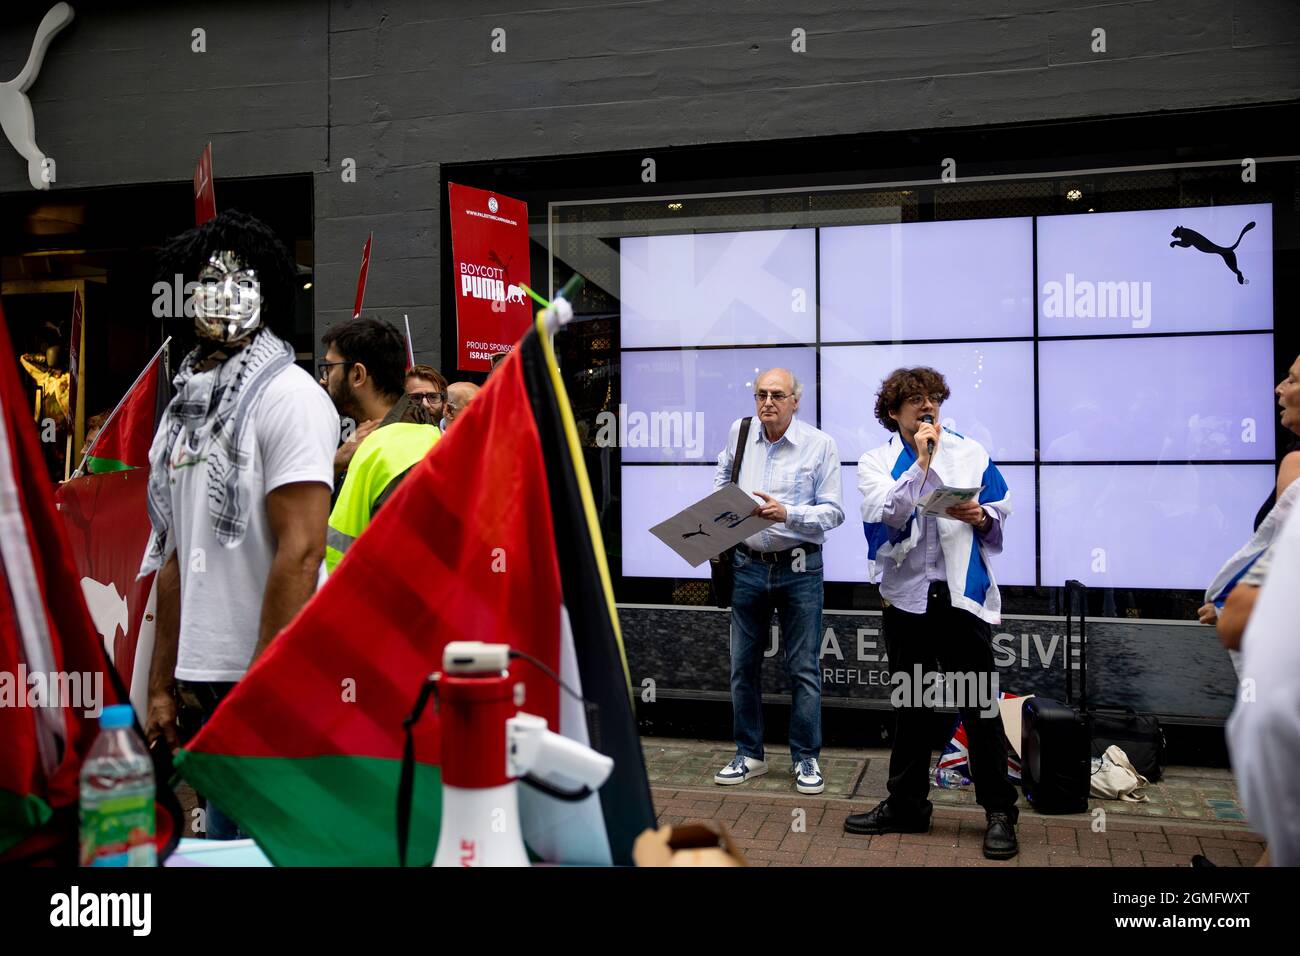 London, UK. 18th Sep, 2021. A counter protester seen presenting at Carnaby Street during the demonstration.A global boycott campaign called by Palestinian supporters against Puma in review of their sponsorship of the Israel Football Association. A small group counter-protesters supporting Israeli presented in the boycott action outside the Puma flagship store in London. (Photo by Hesther Ng/SOPA Images/Sipa USA) Credit: Sipa USA/Alamy Live News Stock Photo